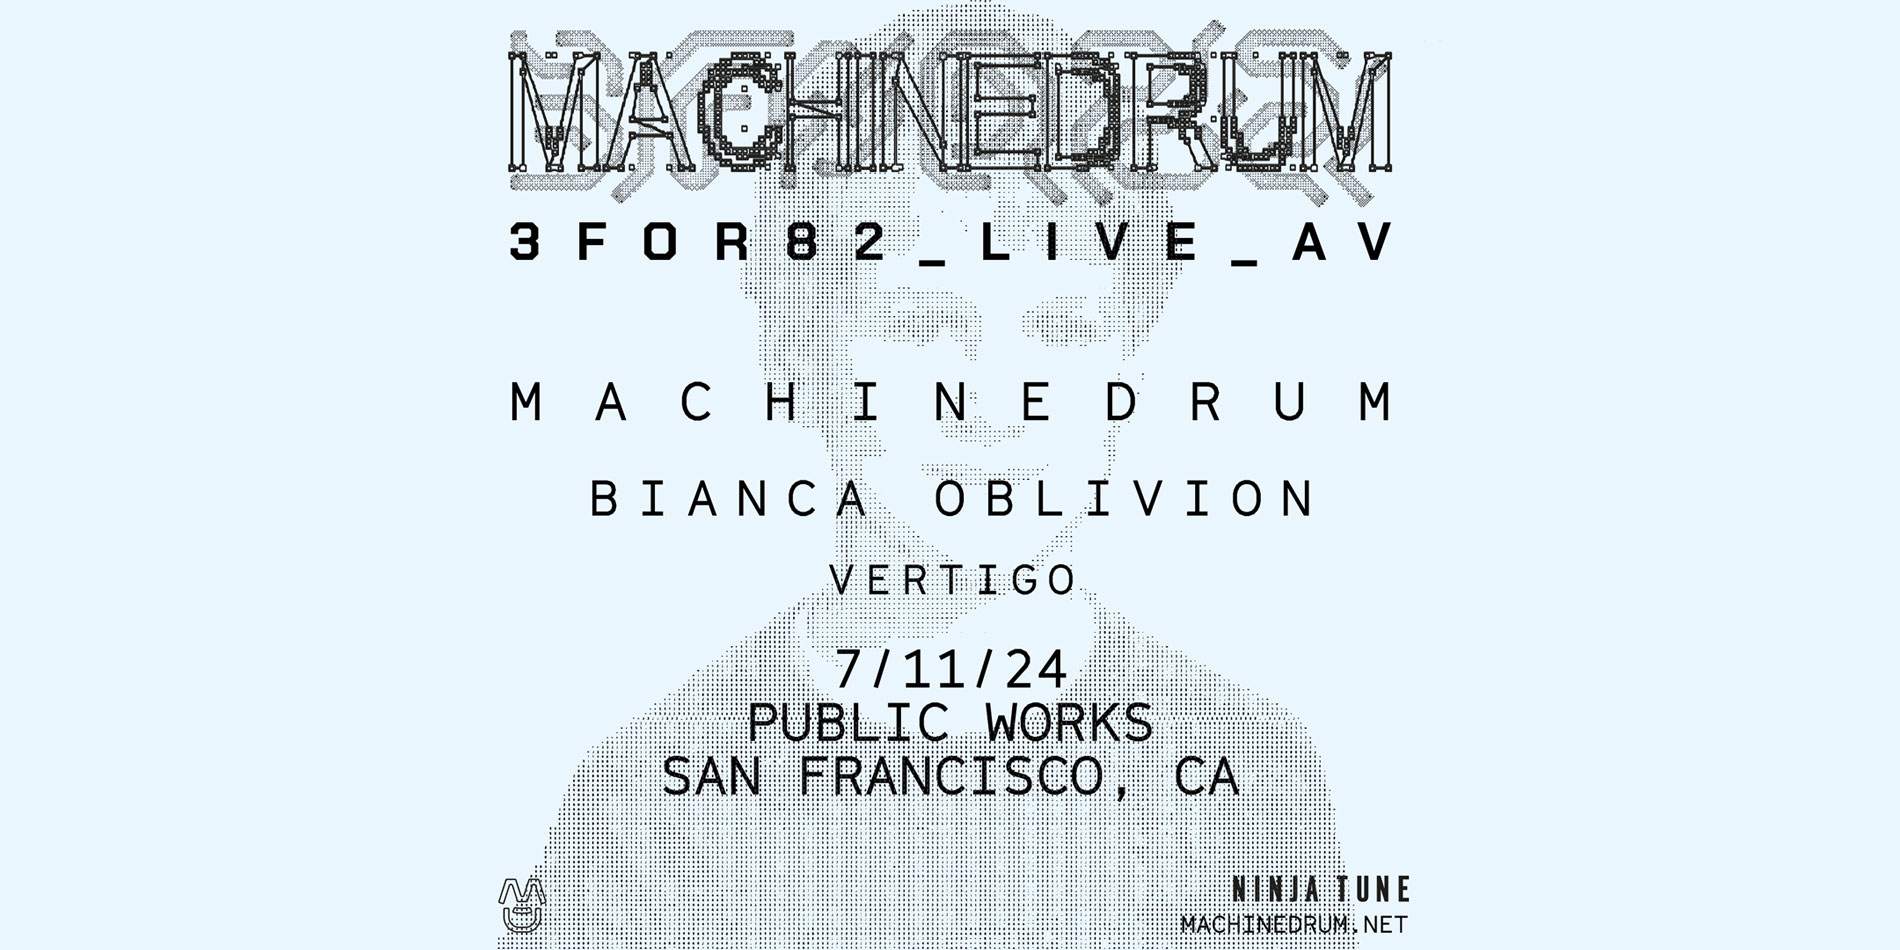 Machinedrum_3FOR82_LIVE_A/V_ - フライヤー表